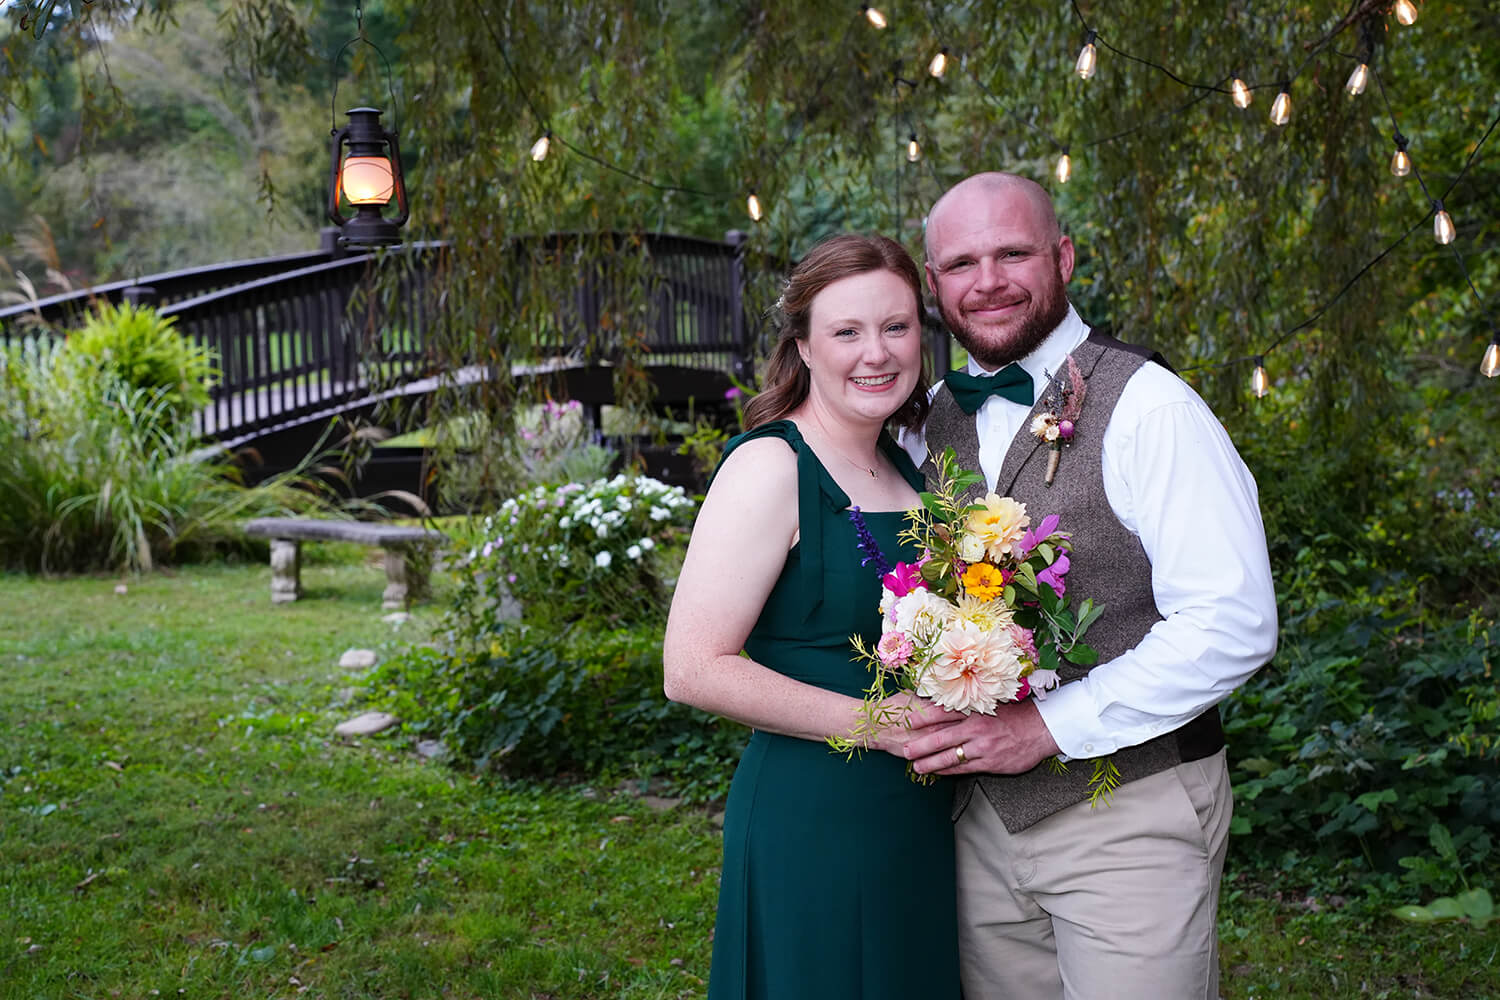 Elopement wedding with bride in simple green dress at a willow tree with fairy lights